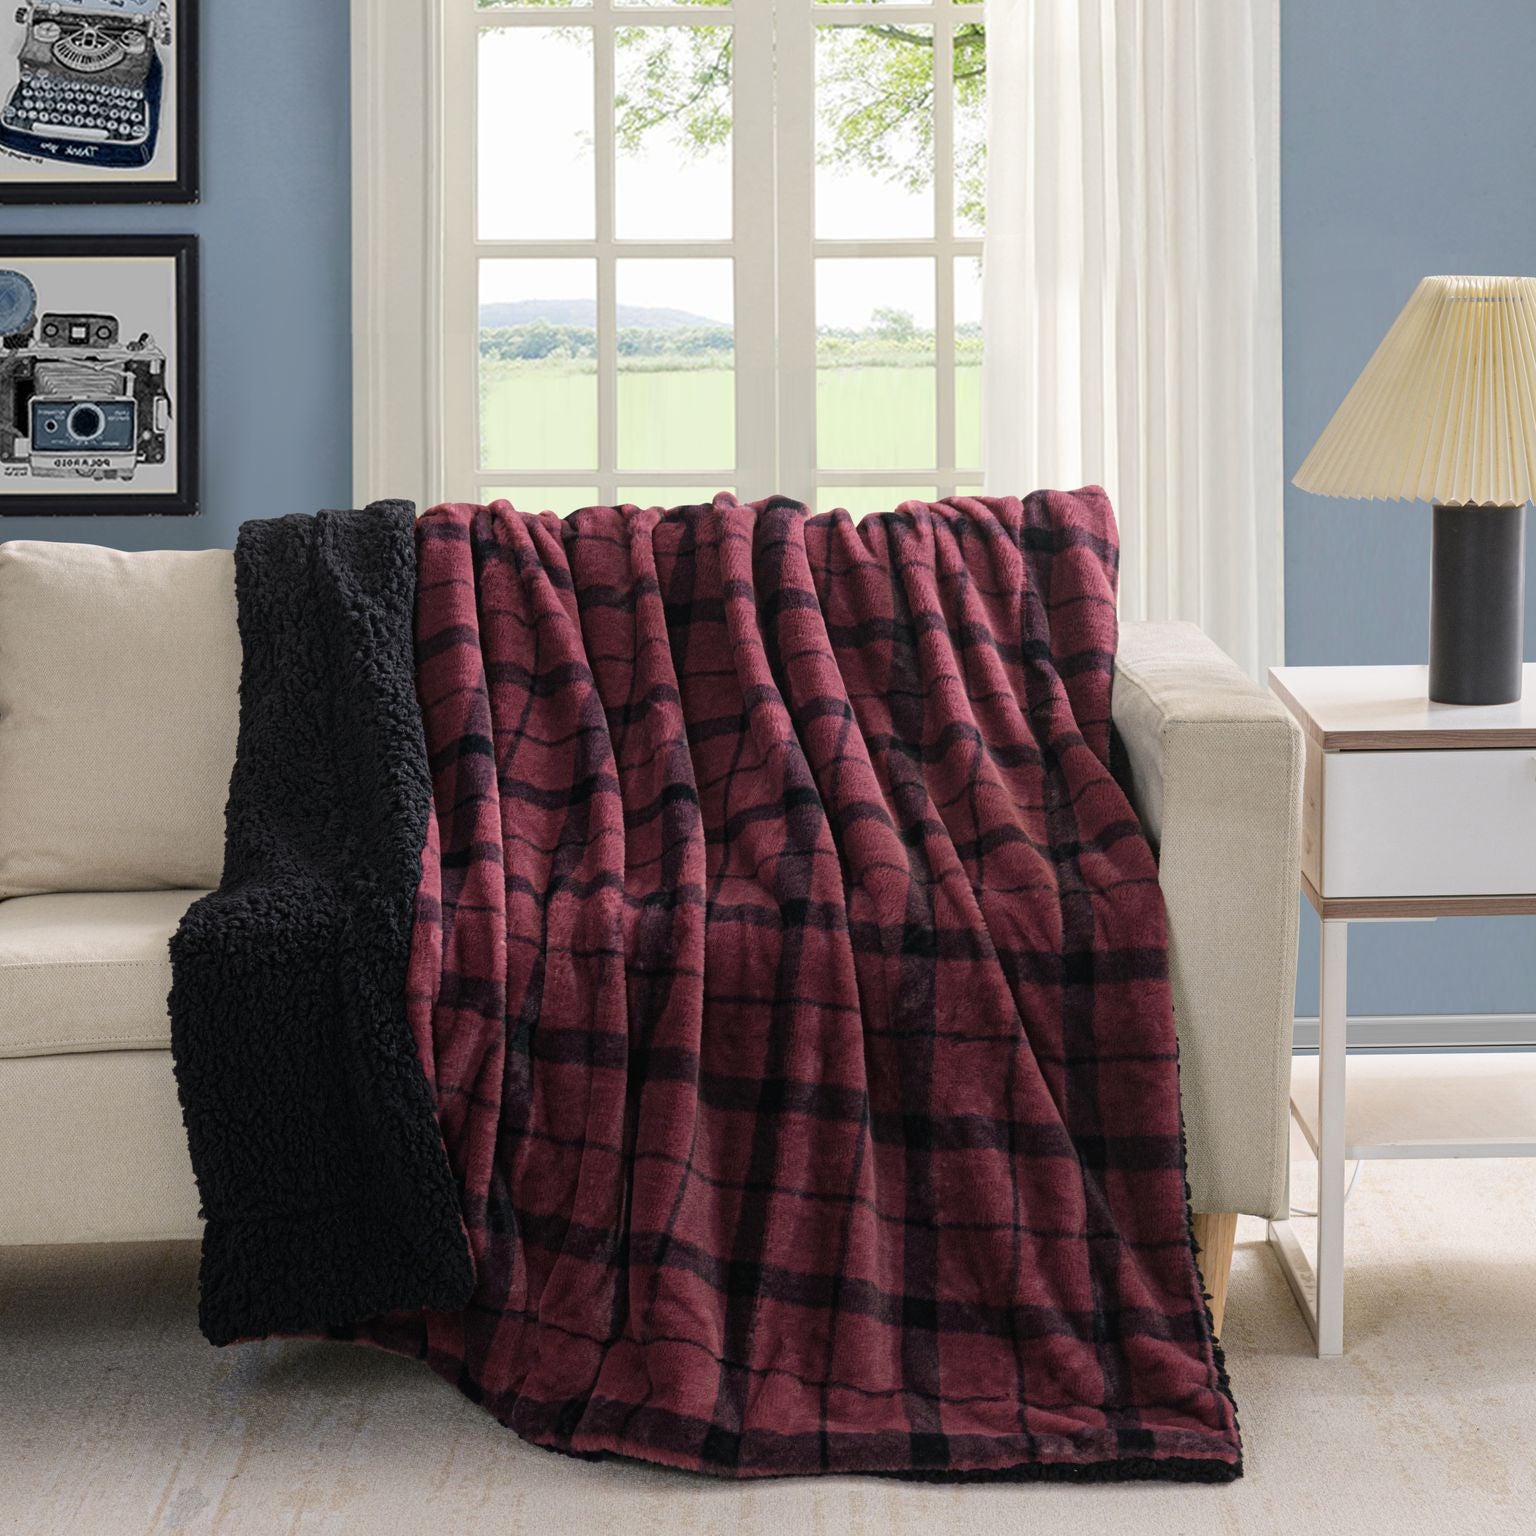 Printed Fur to Sherpa Throw Blanket 50 x 60 inches Ruby Wine to Black